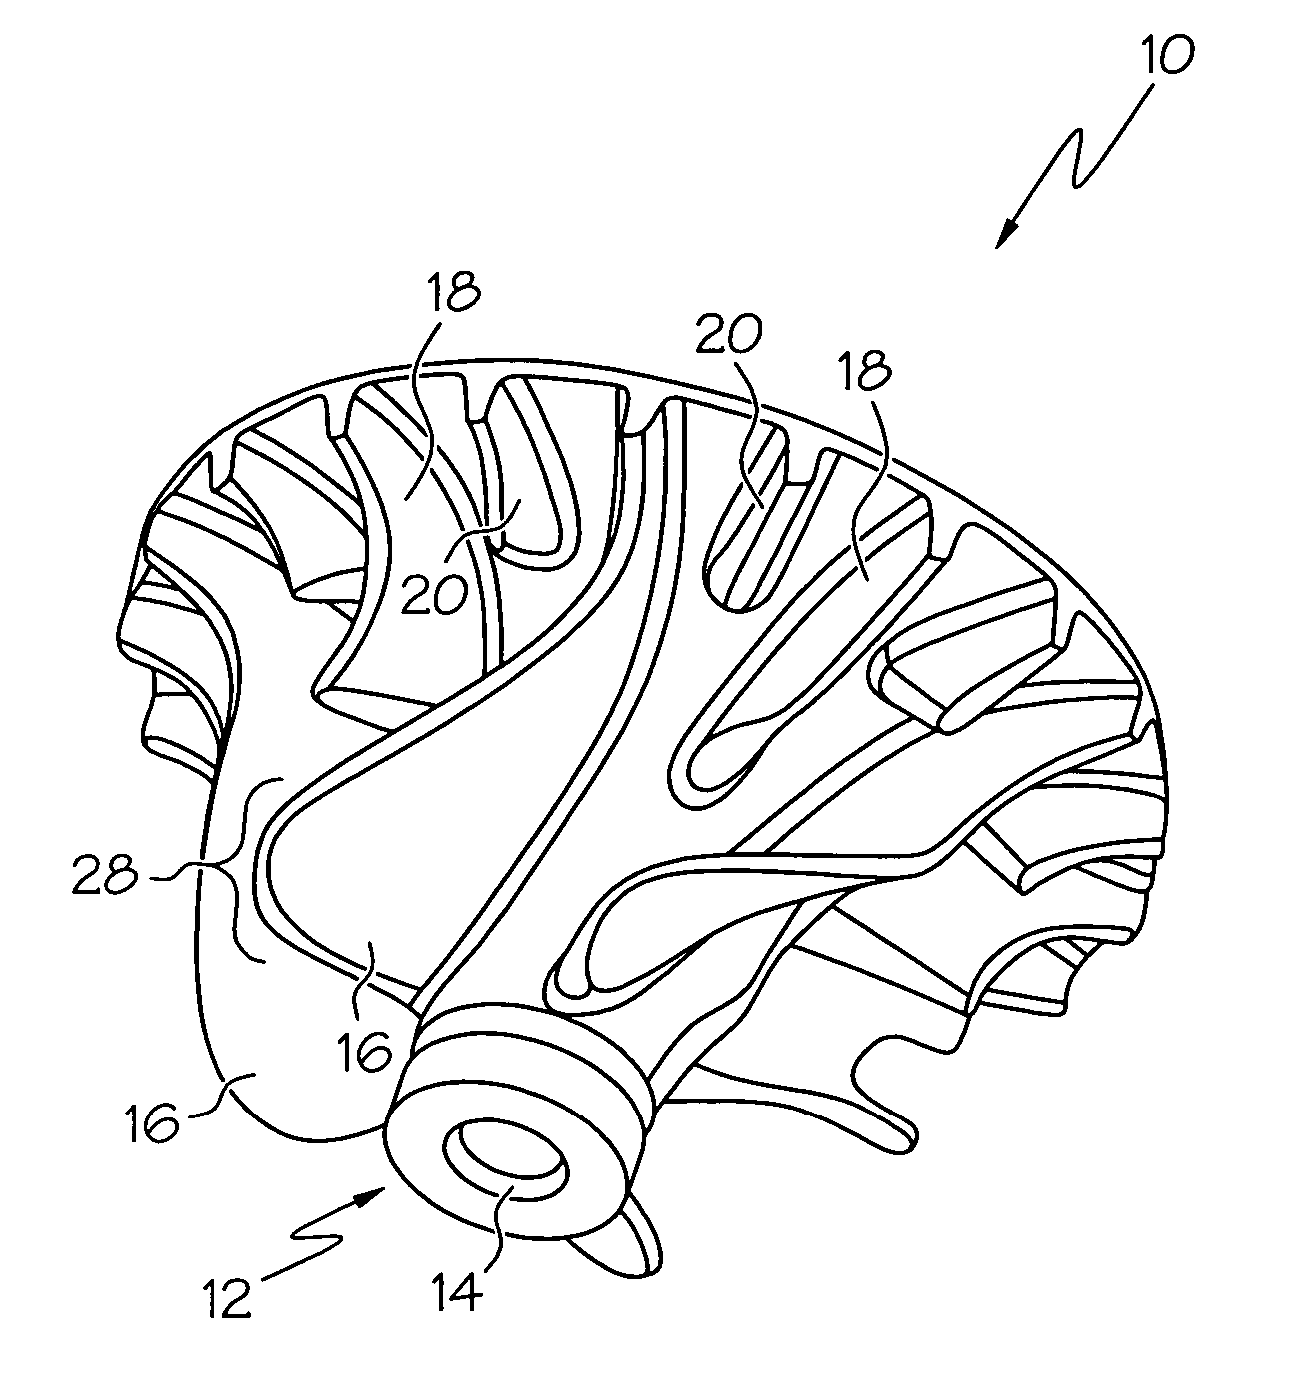 Radial turbine wheel with locally curved trailing edge tip